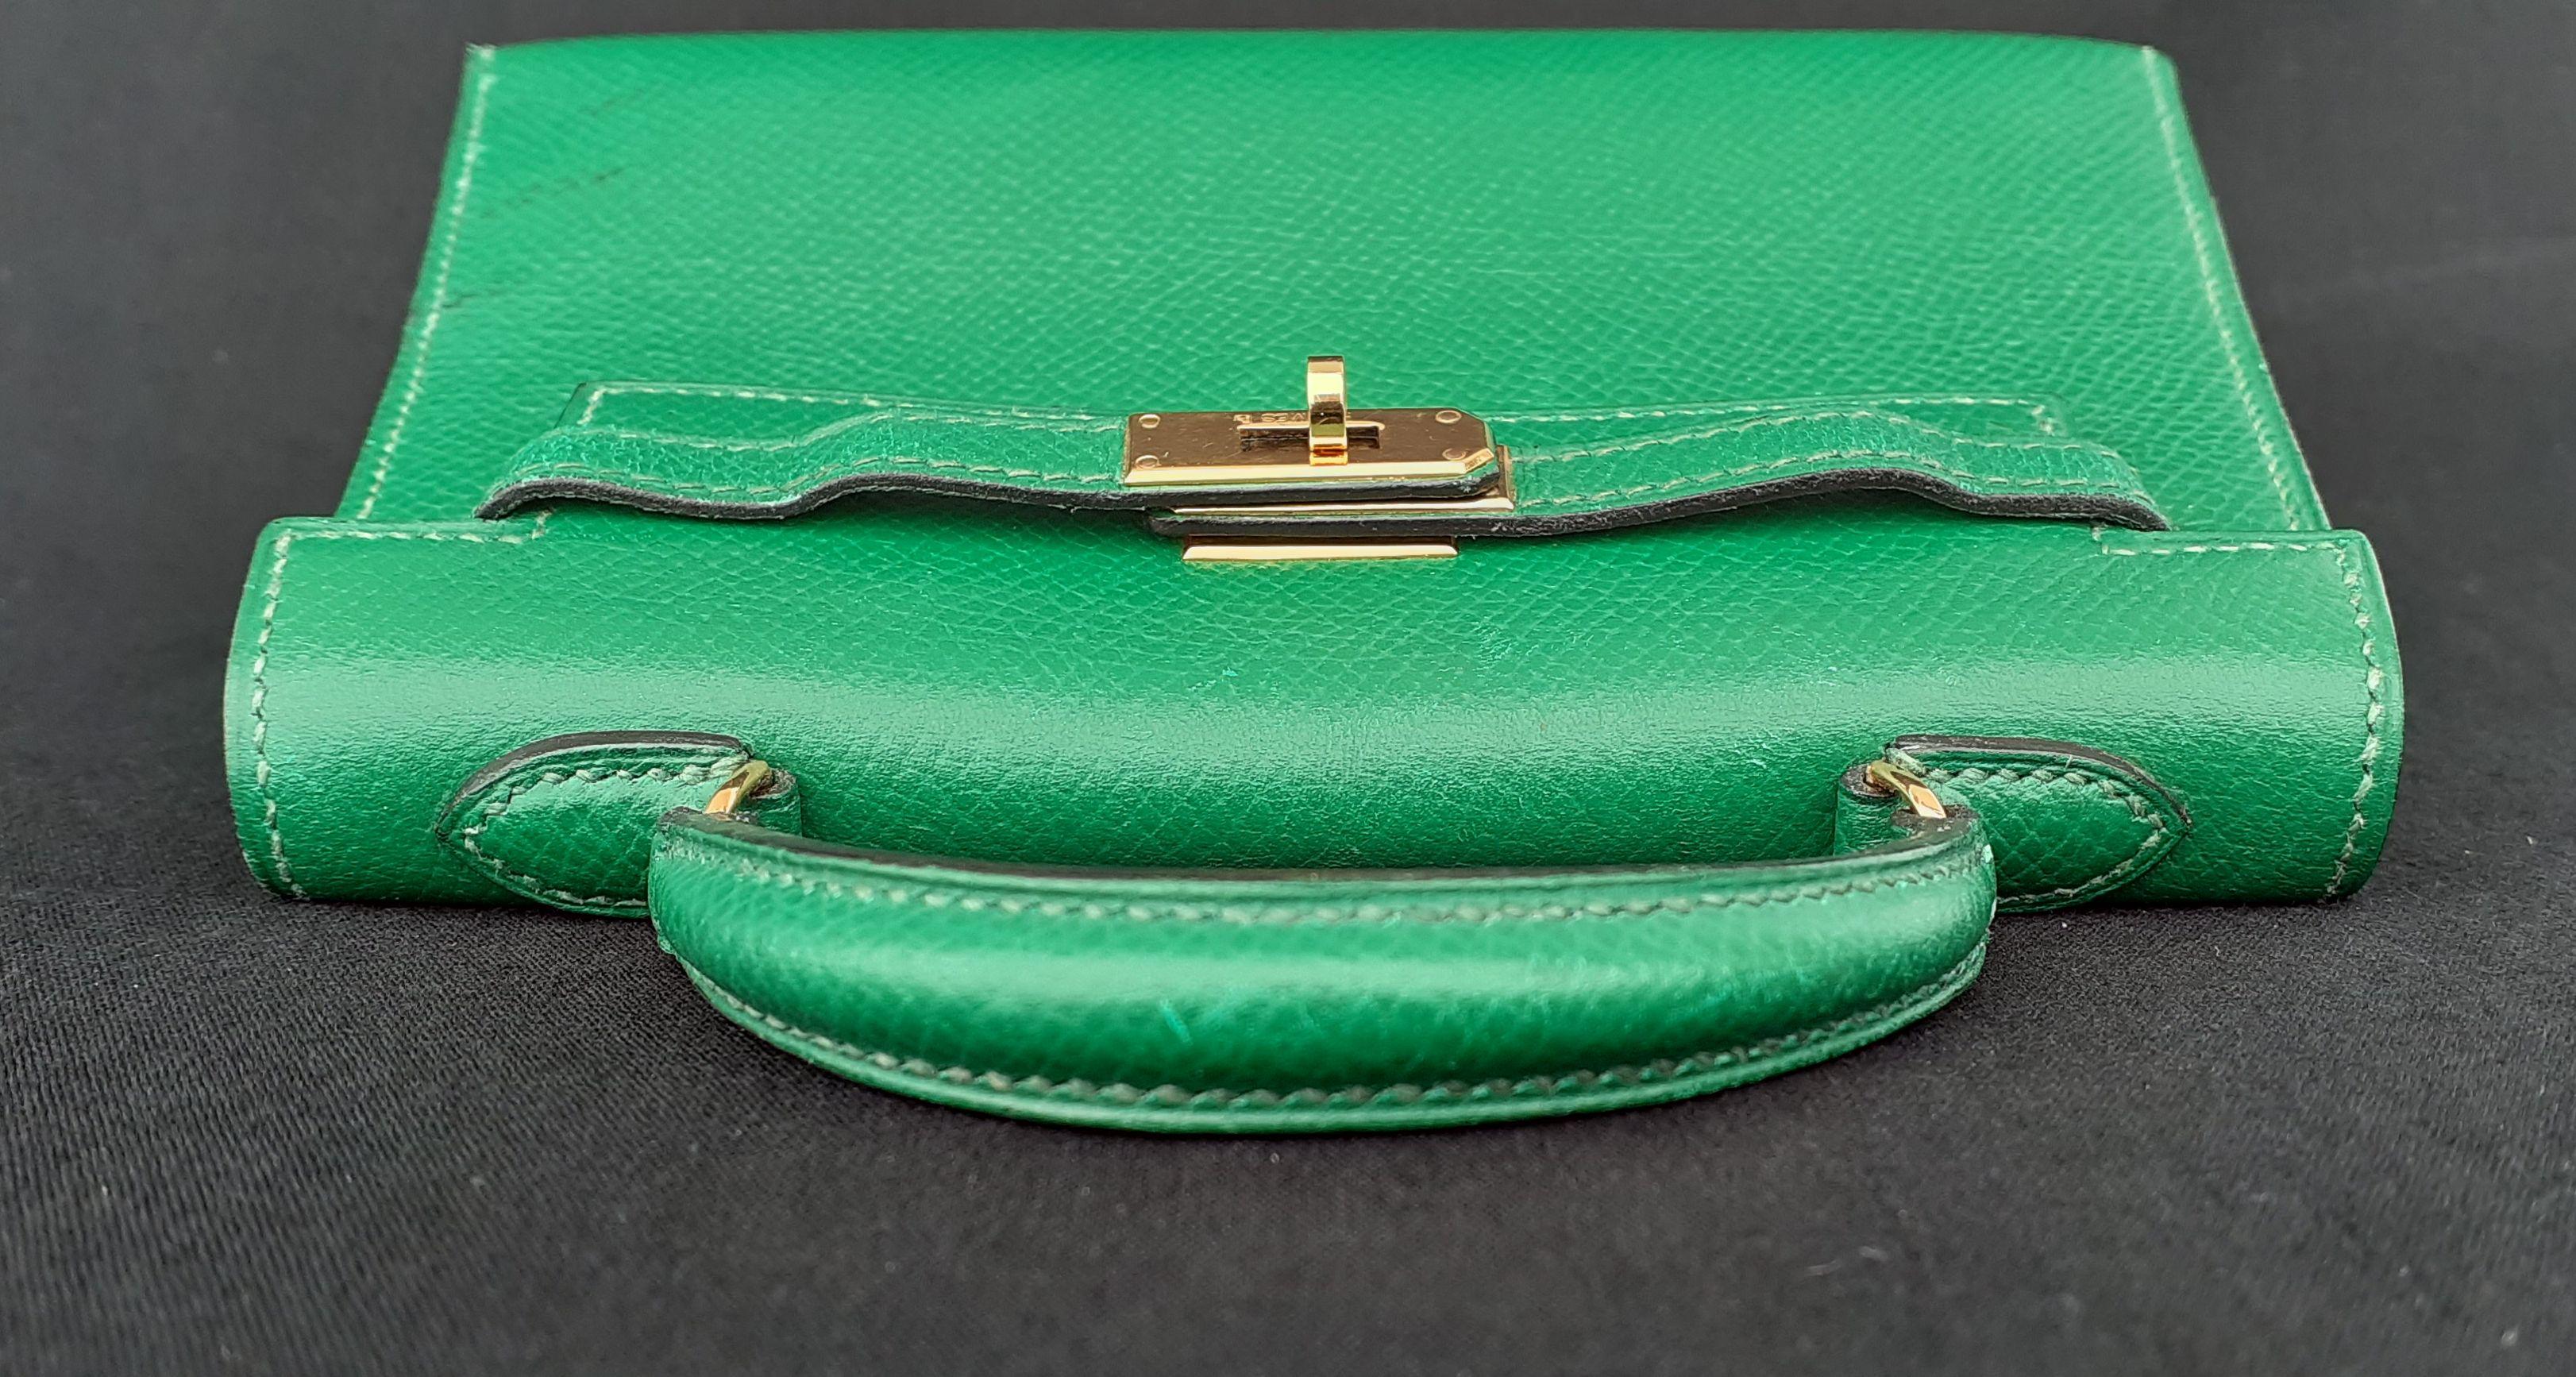 Exceptional Hermès Vintage Micro Kelly 15 cm Sellier Bag Green Leather Gold Hdw 1